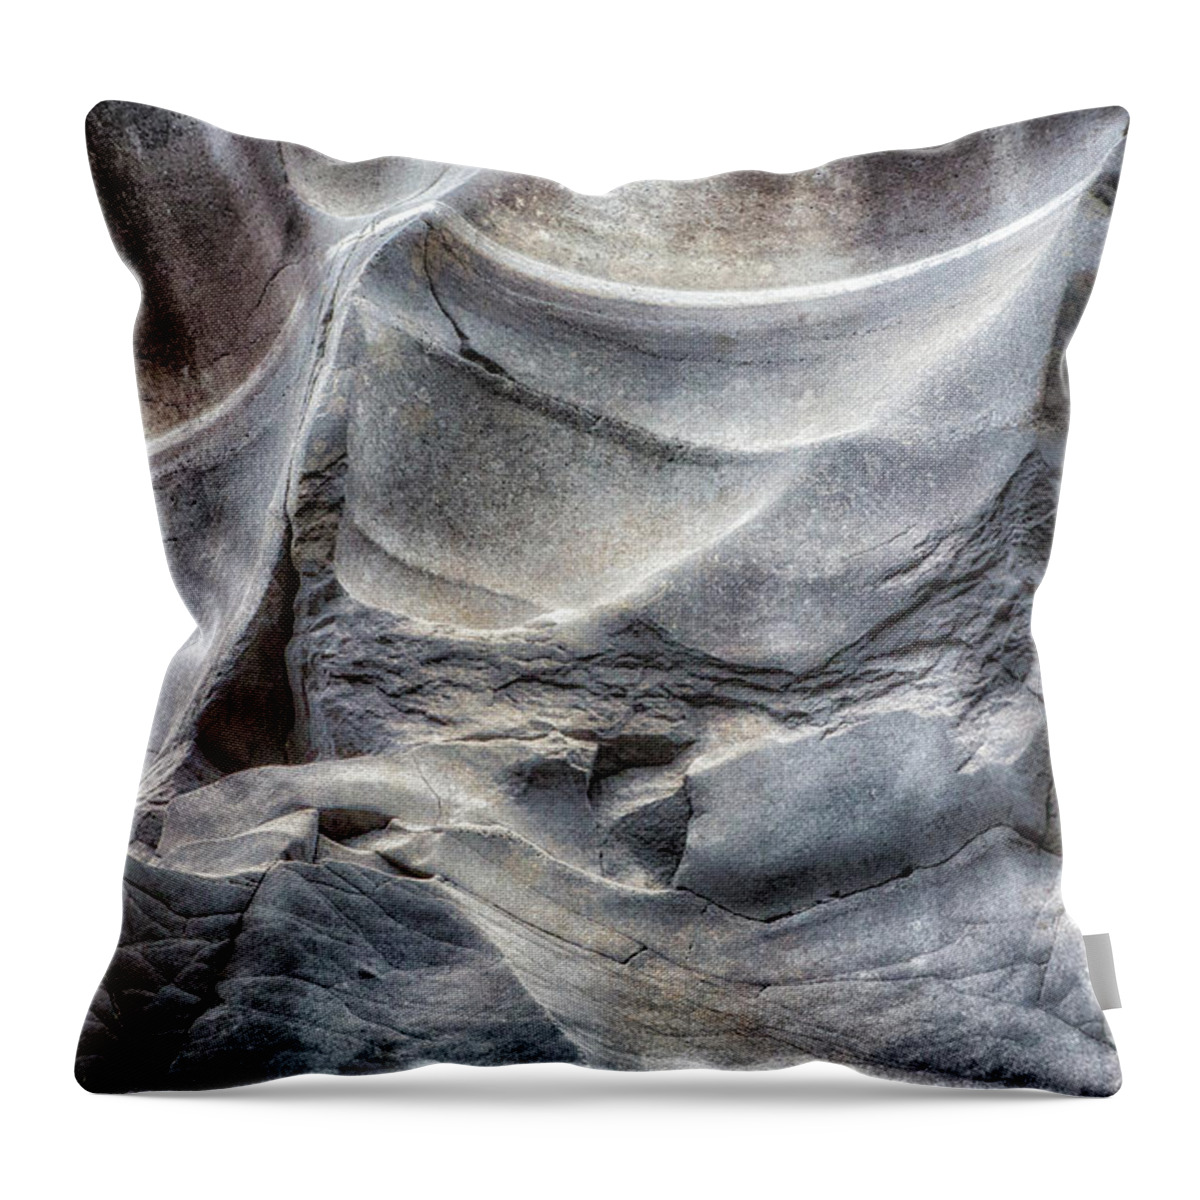 Black Magic Canyon Throw Pillow featuring the photograph Water Sculpting Rock Art by Kaylyn Franks by Kaylyn Franks